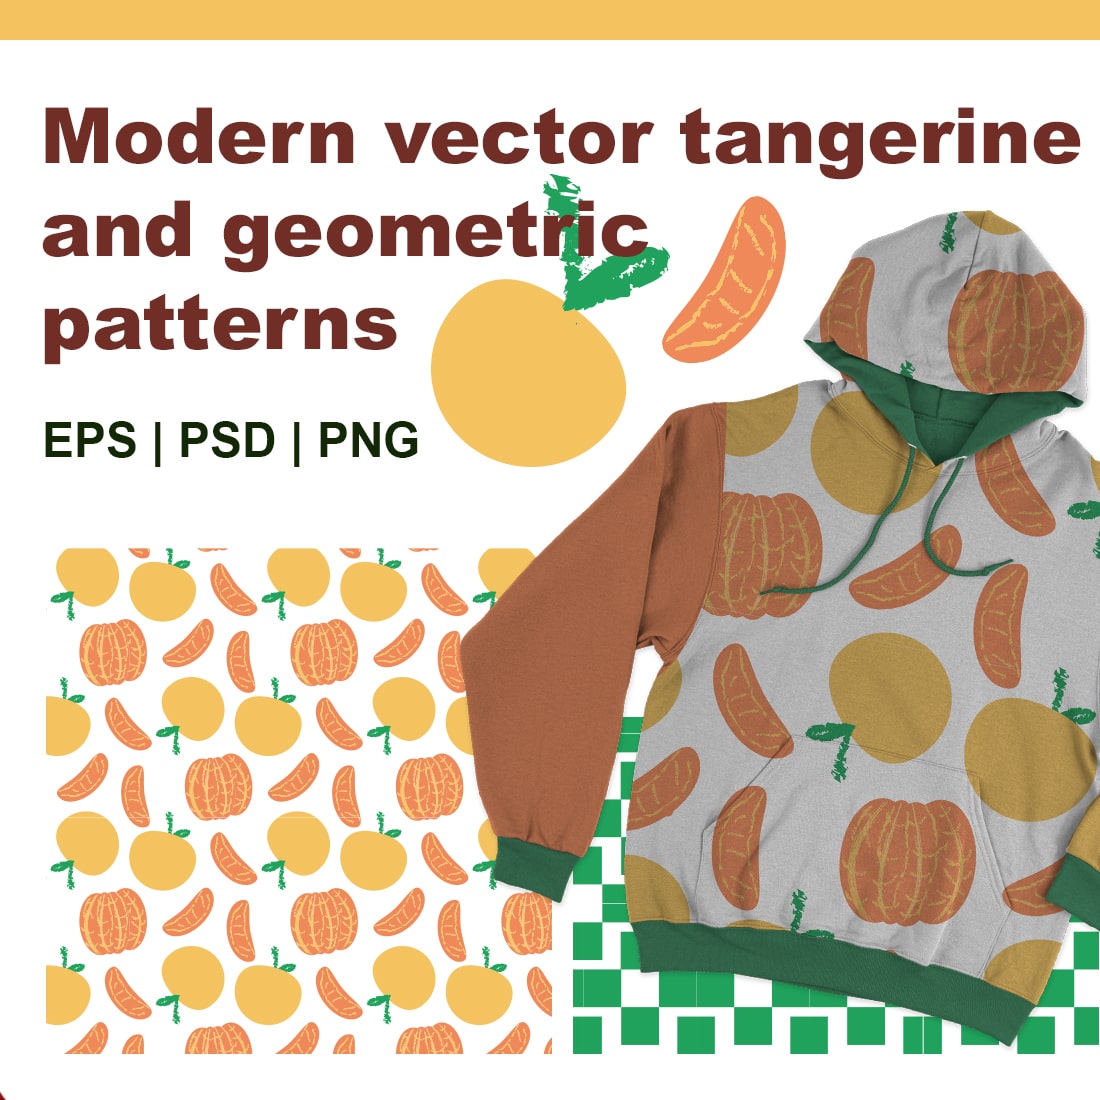 All eyes on your product with this design! Exclusive and modern tangerine and geometric patterns design for your successful projects! cover image.